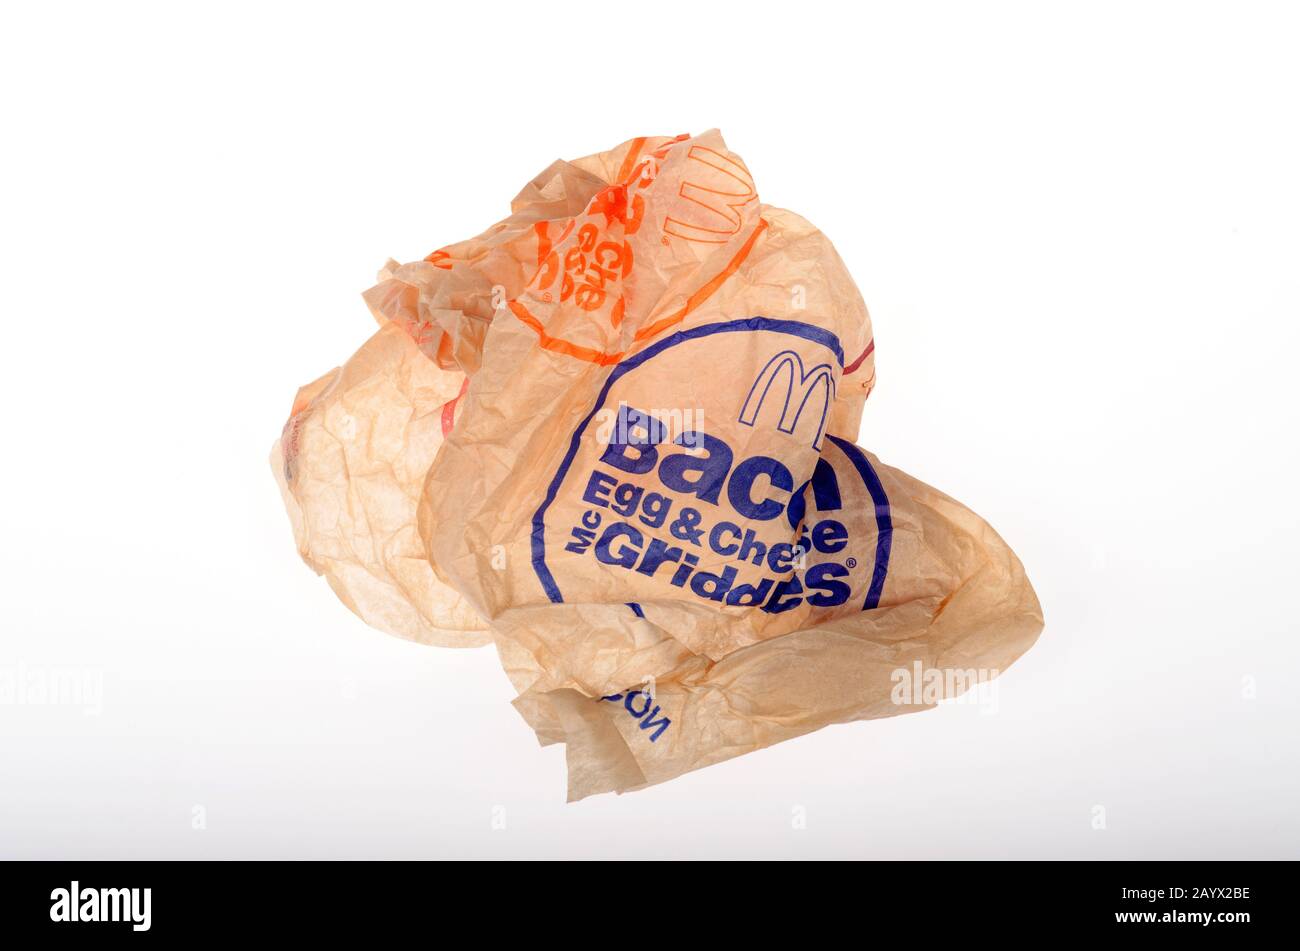 McDonalds trash bacon, egg and cheese mcgriddles wrapper Stock Photo